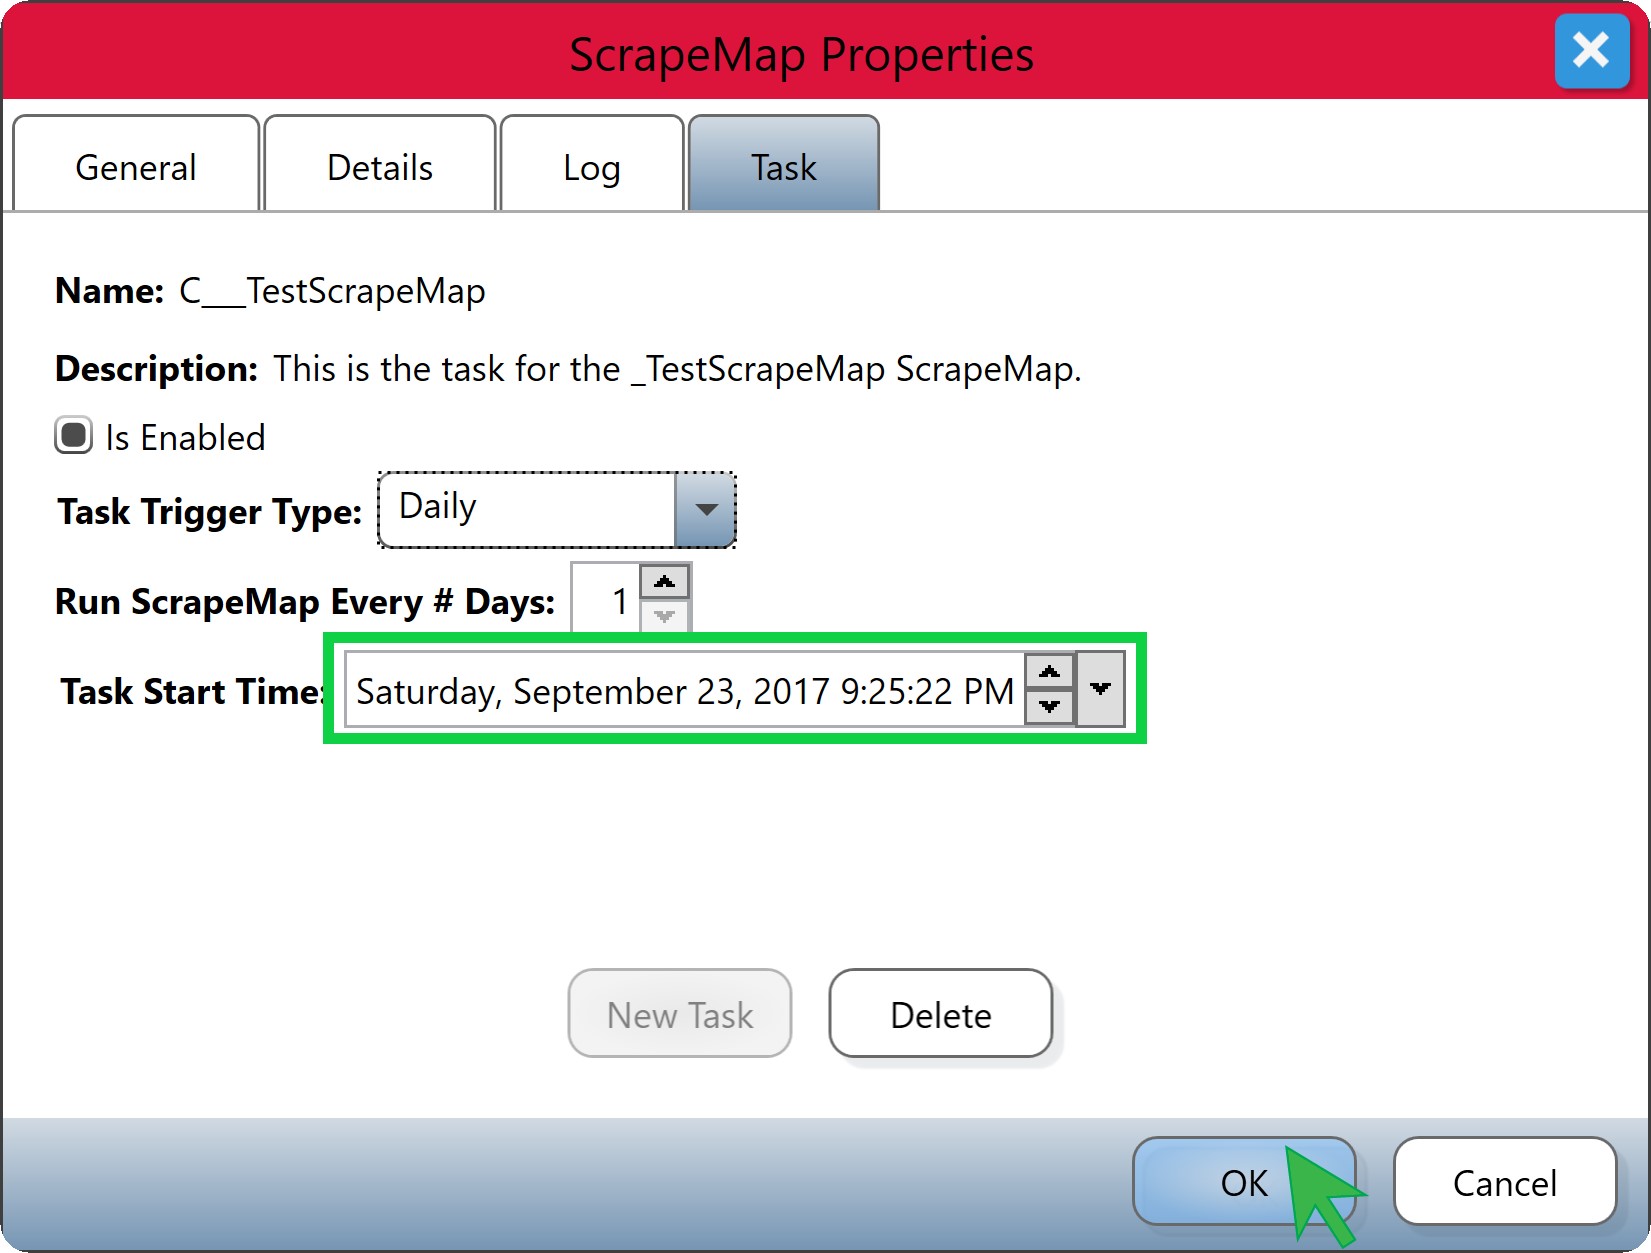 Task Tab of the ScrapeMap Properties Dialog with Task Start Time highlighted